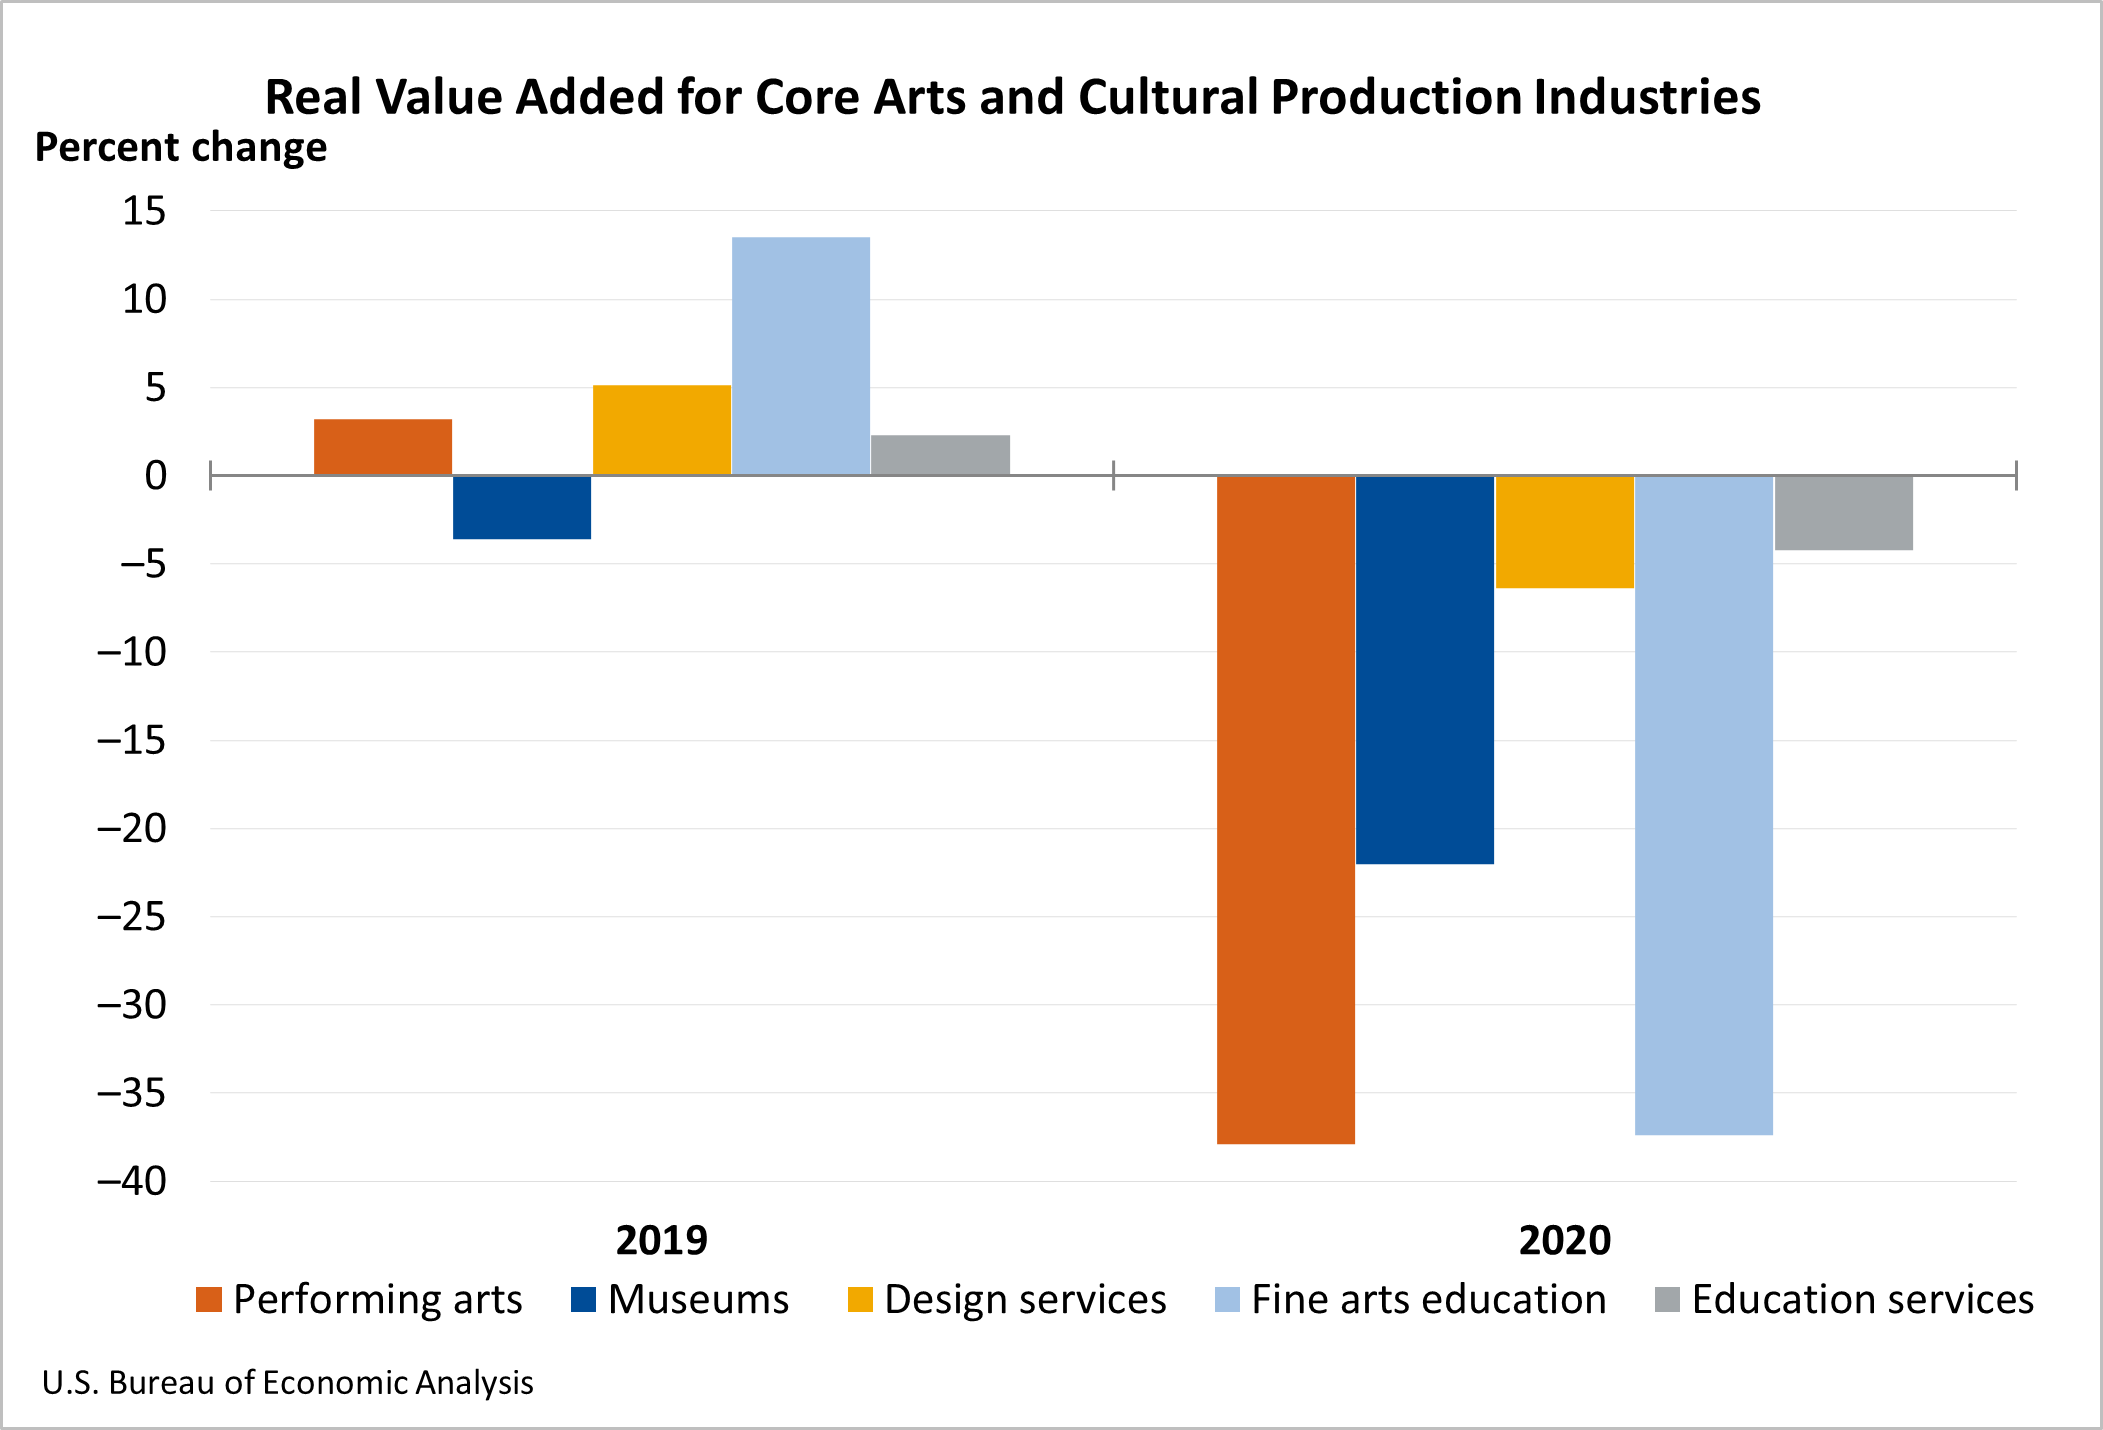  Real Value Added for Core Arts and Cultural Production Industries